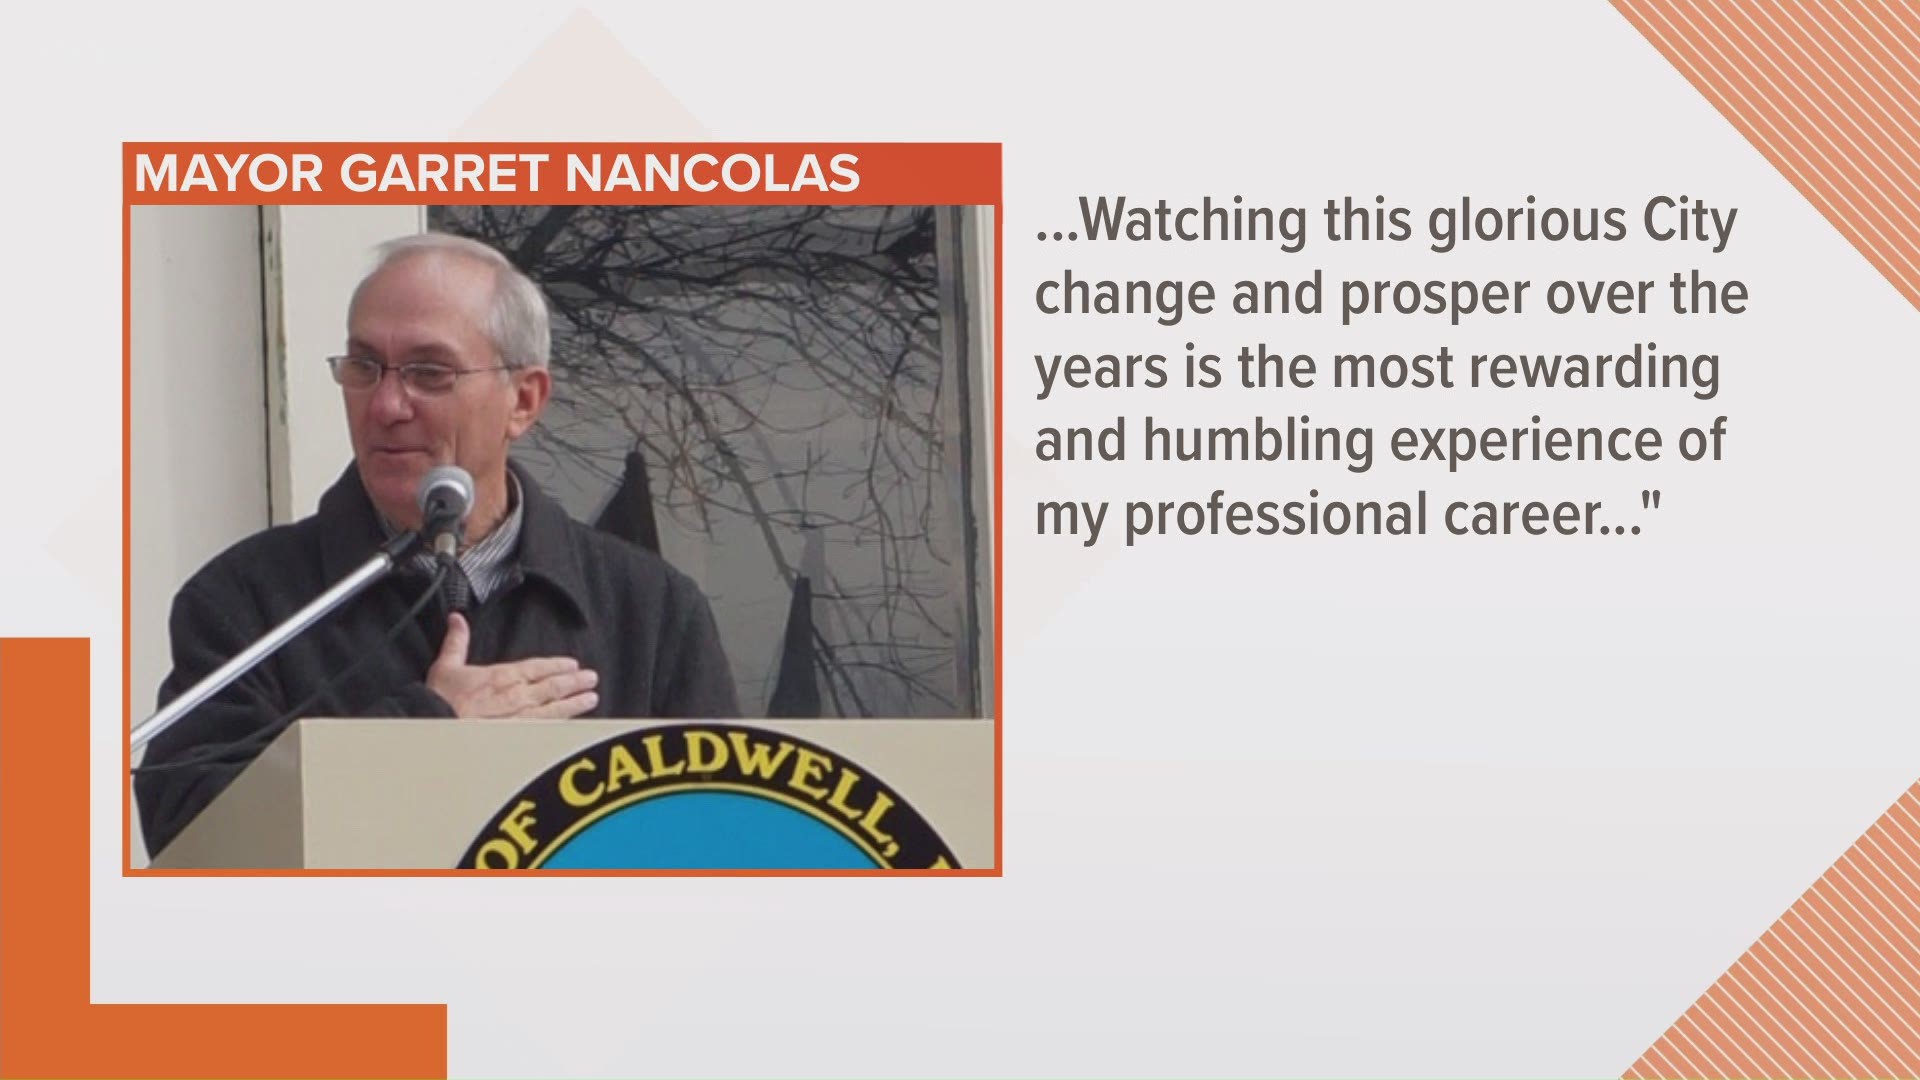 Garrett Nancolas has been elected six times since 1997 and is the longest-serving mayor in the city’s history.